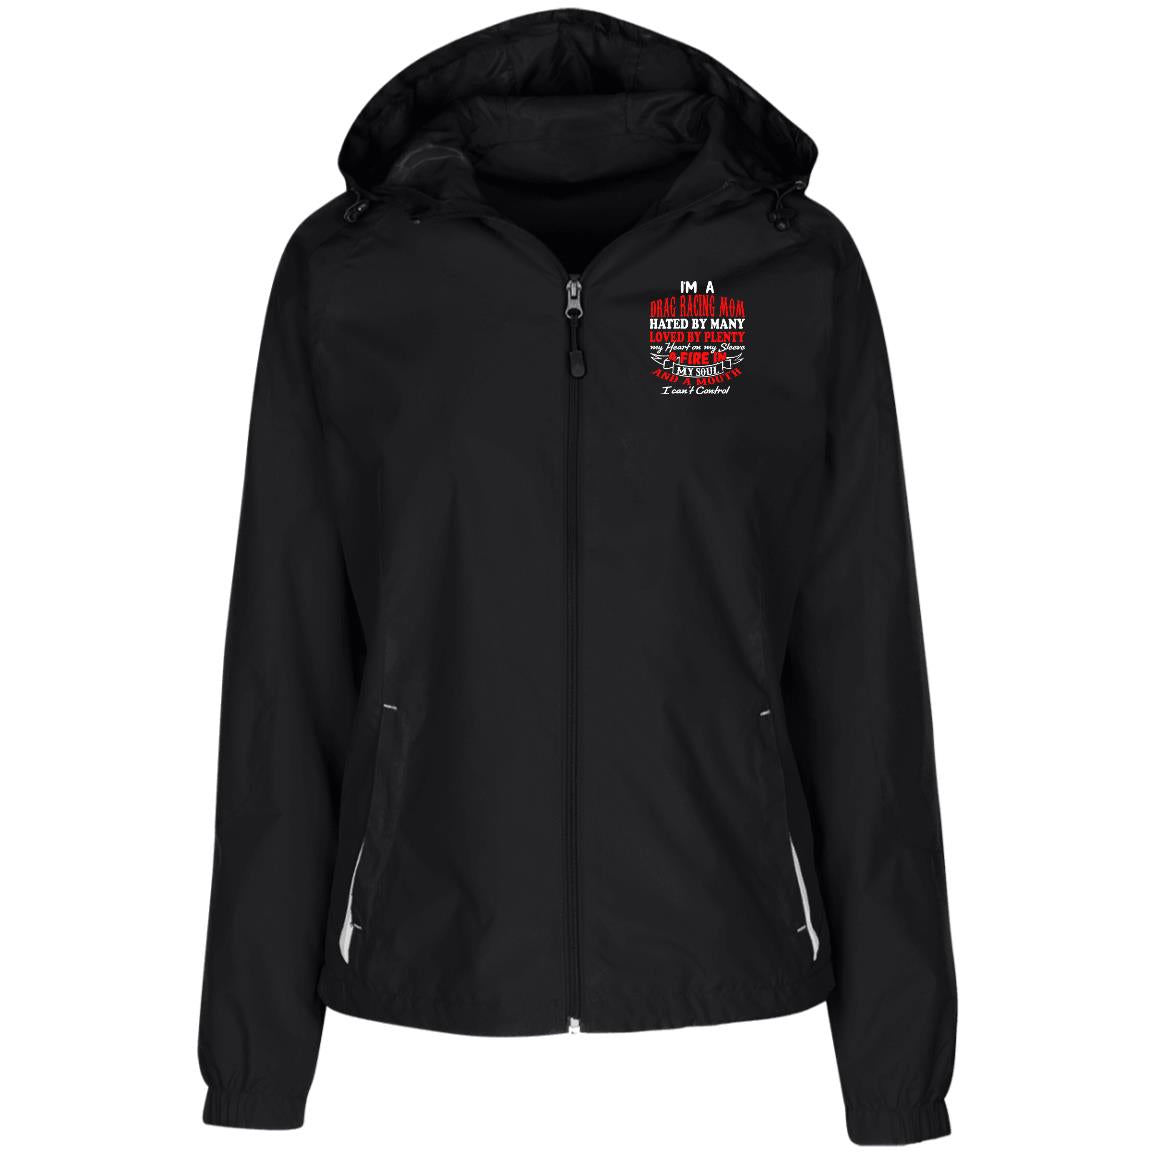 I'm A Drag Racing Mom Hated By Many Loved By Plenty Ladies' Jersey-Lined Hooded Windbreaker